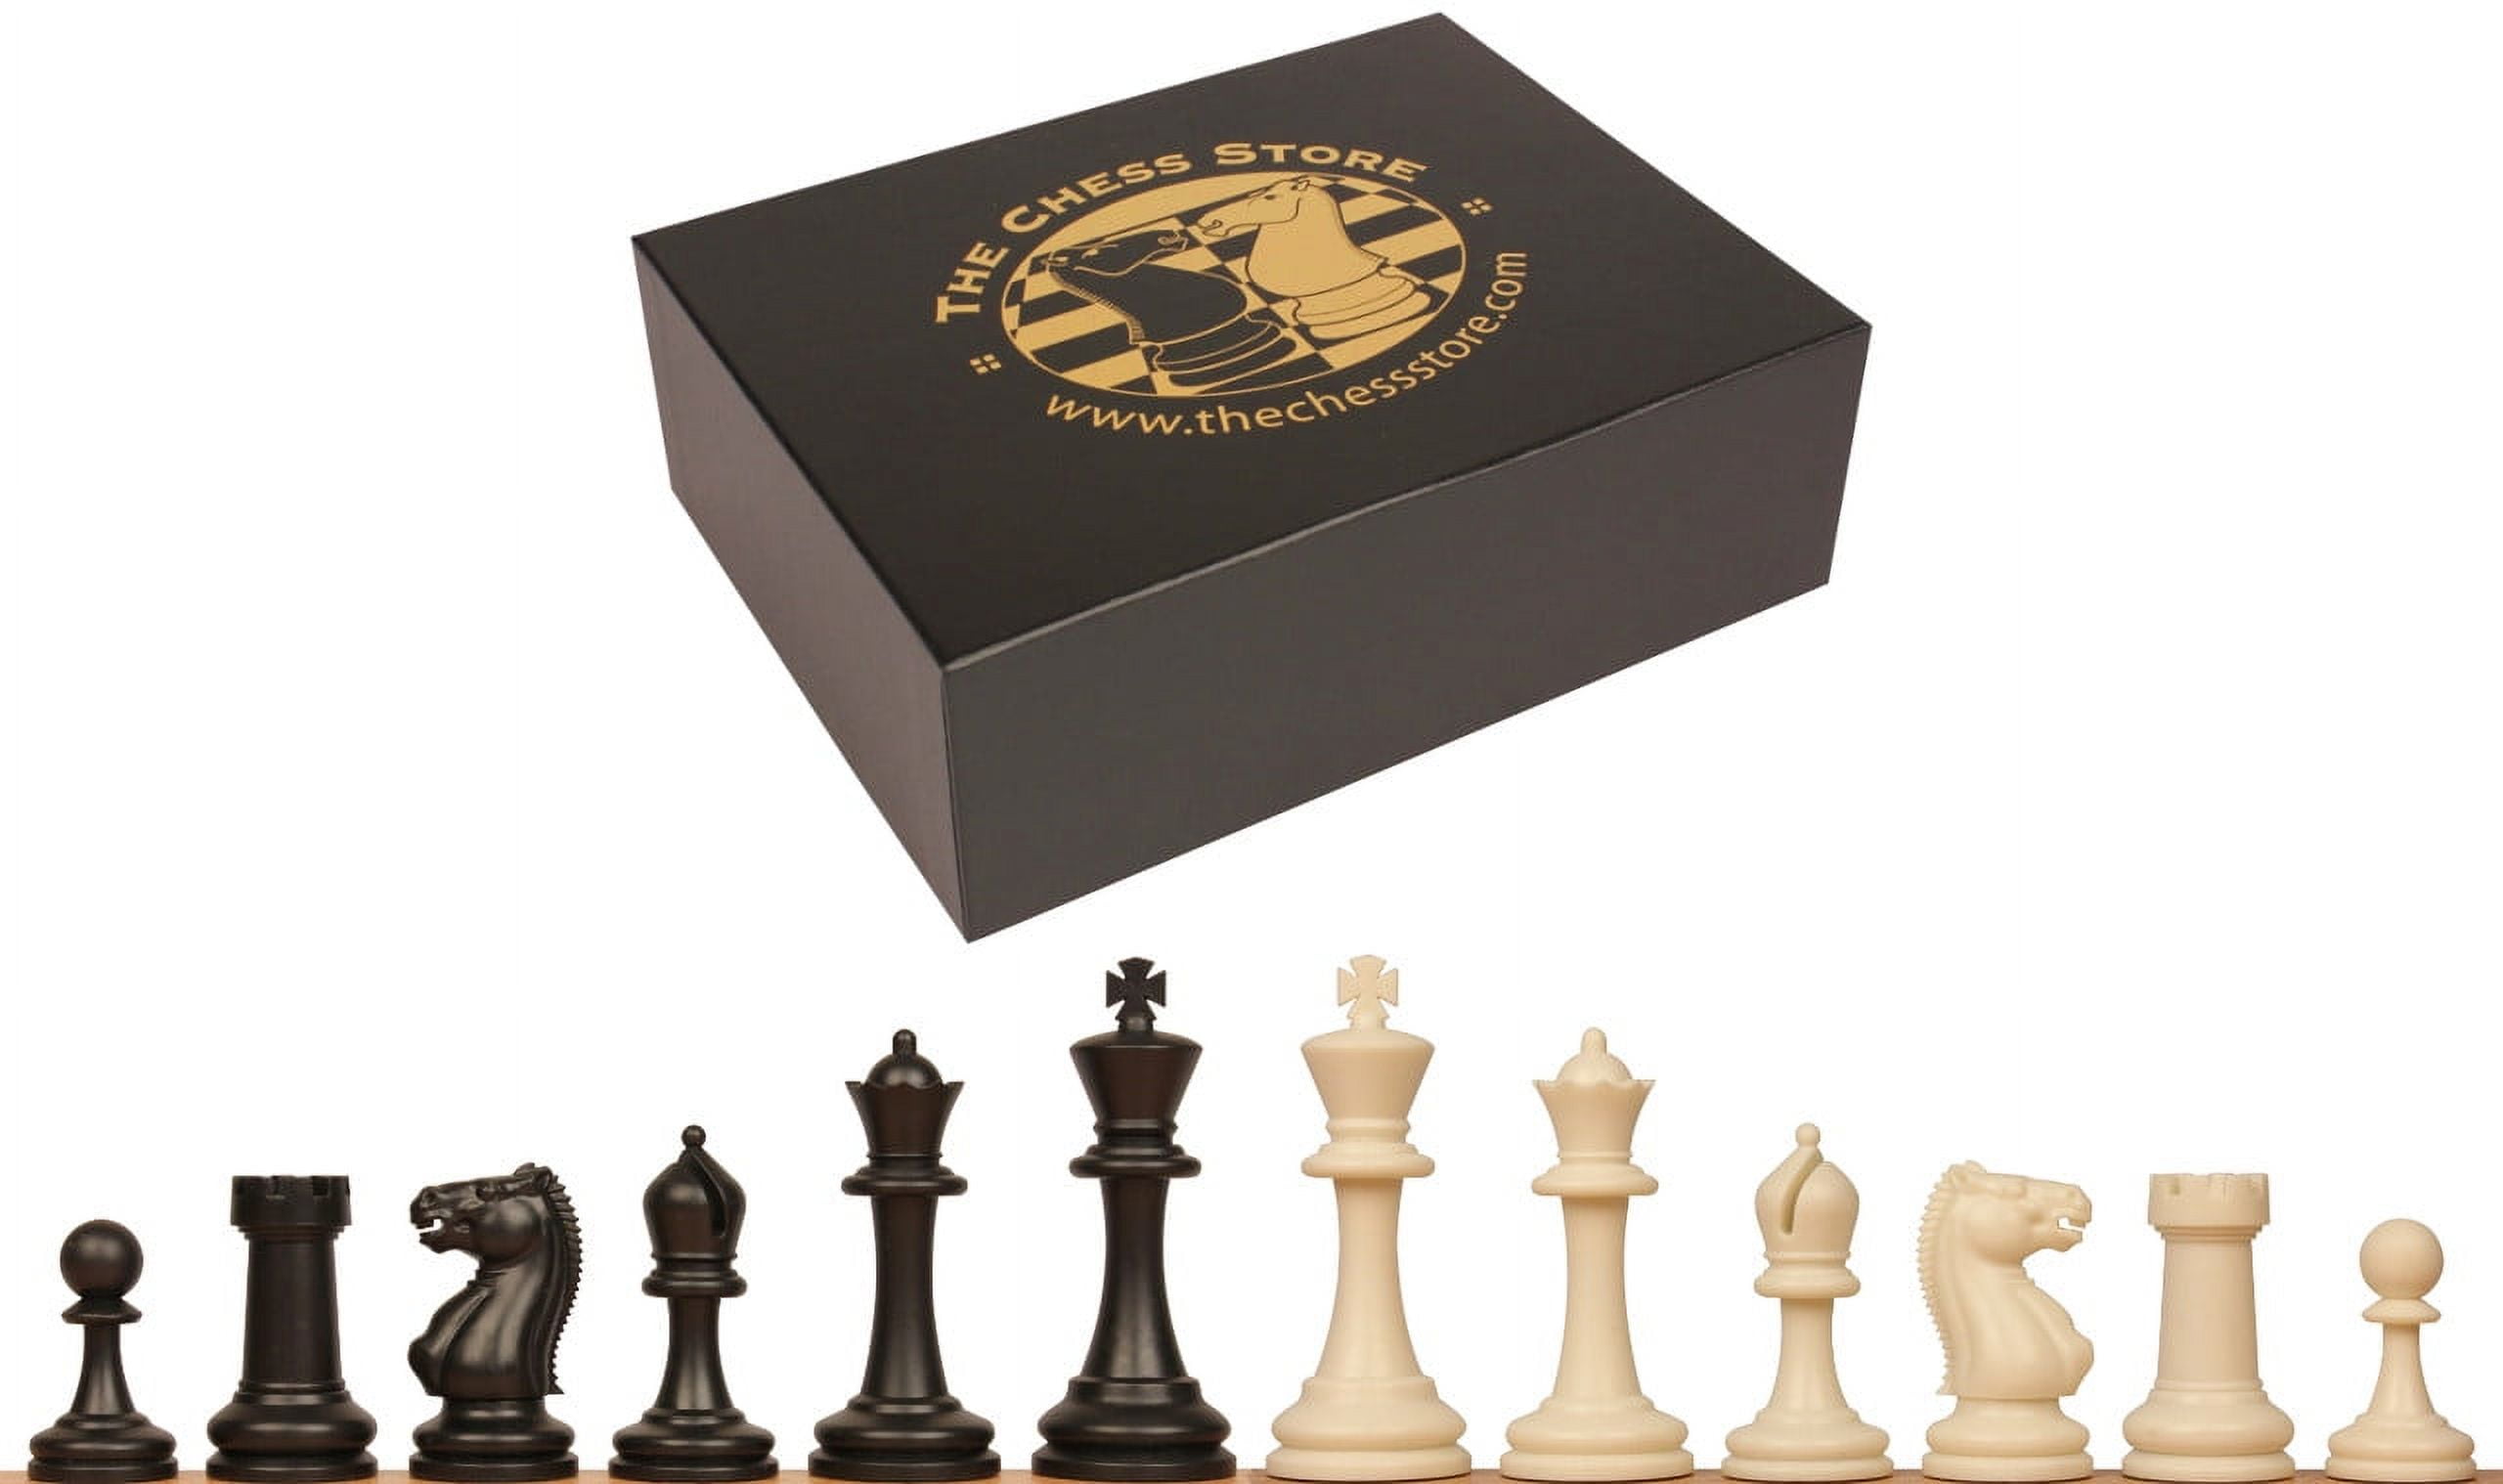 VAMSLOVE Wooden Chess Checkers Game Set 15.5 Large Size Board w/Storage  Drawers, Weighted Chess Pieces - 2 Extra Queens 3 King, Gift for Birthday